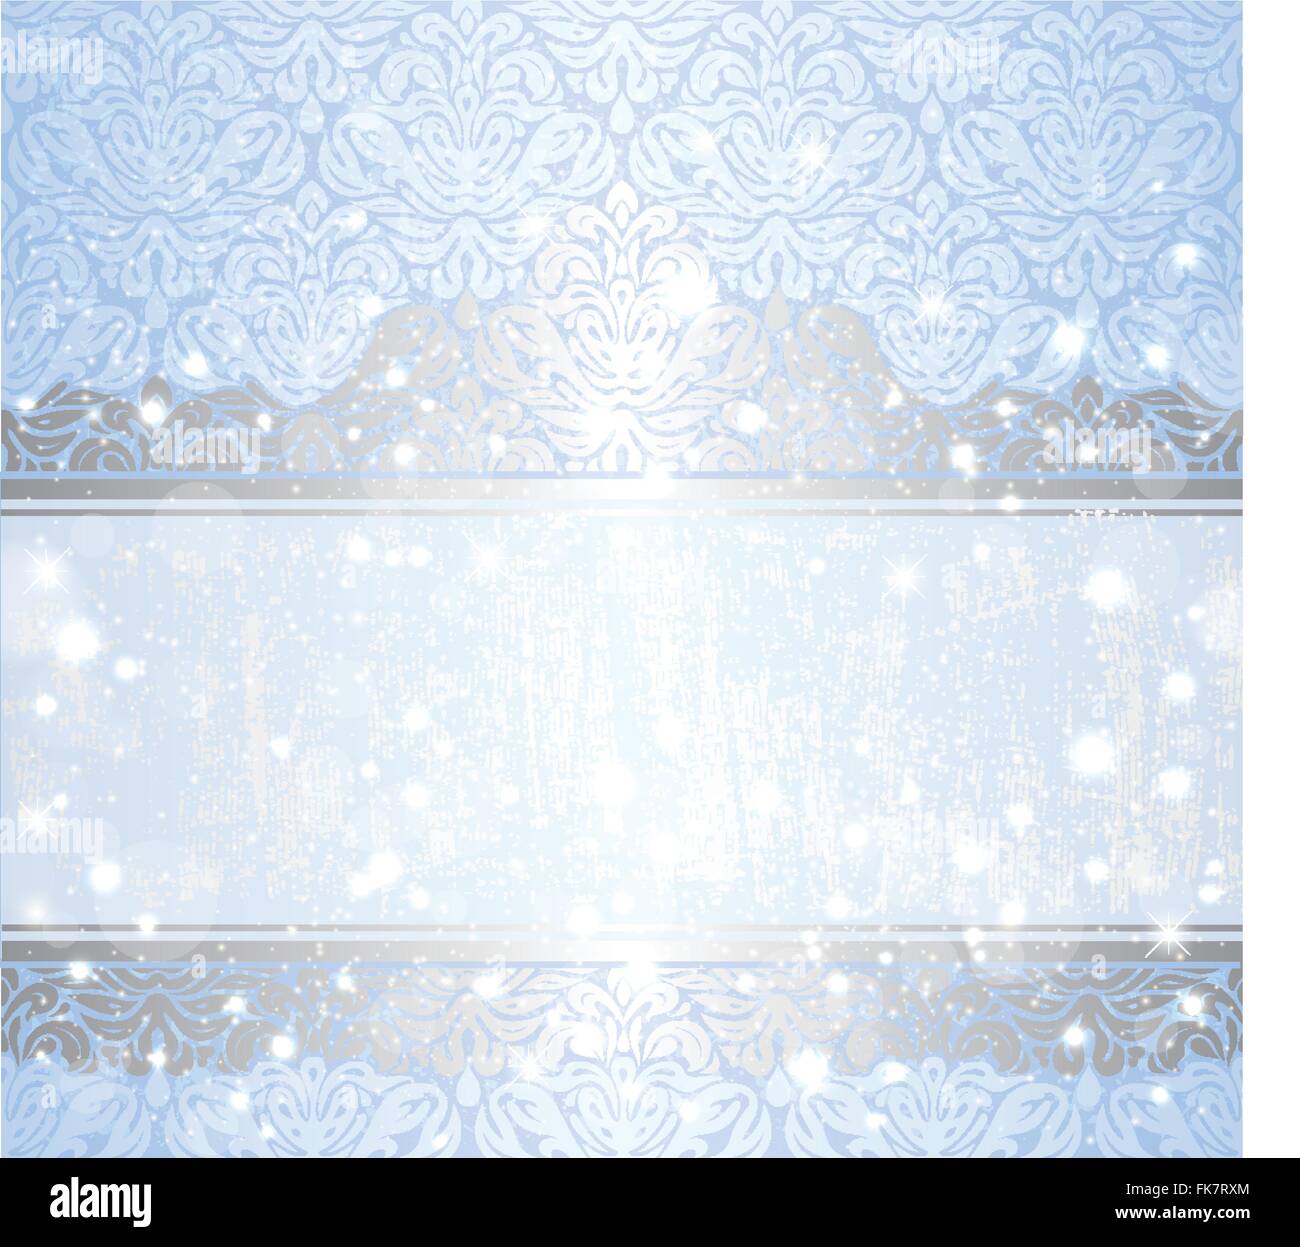 Shiny blue vintage Christmas card background Stock Vector